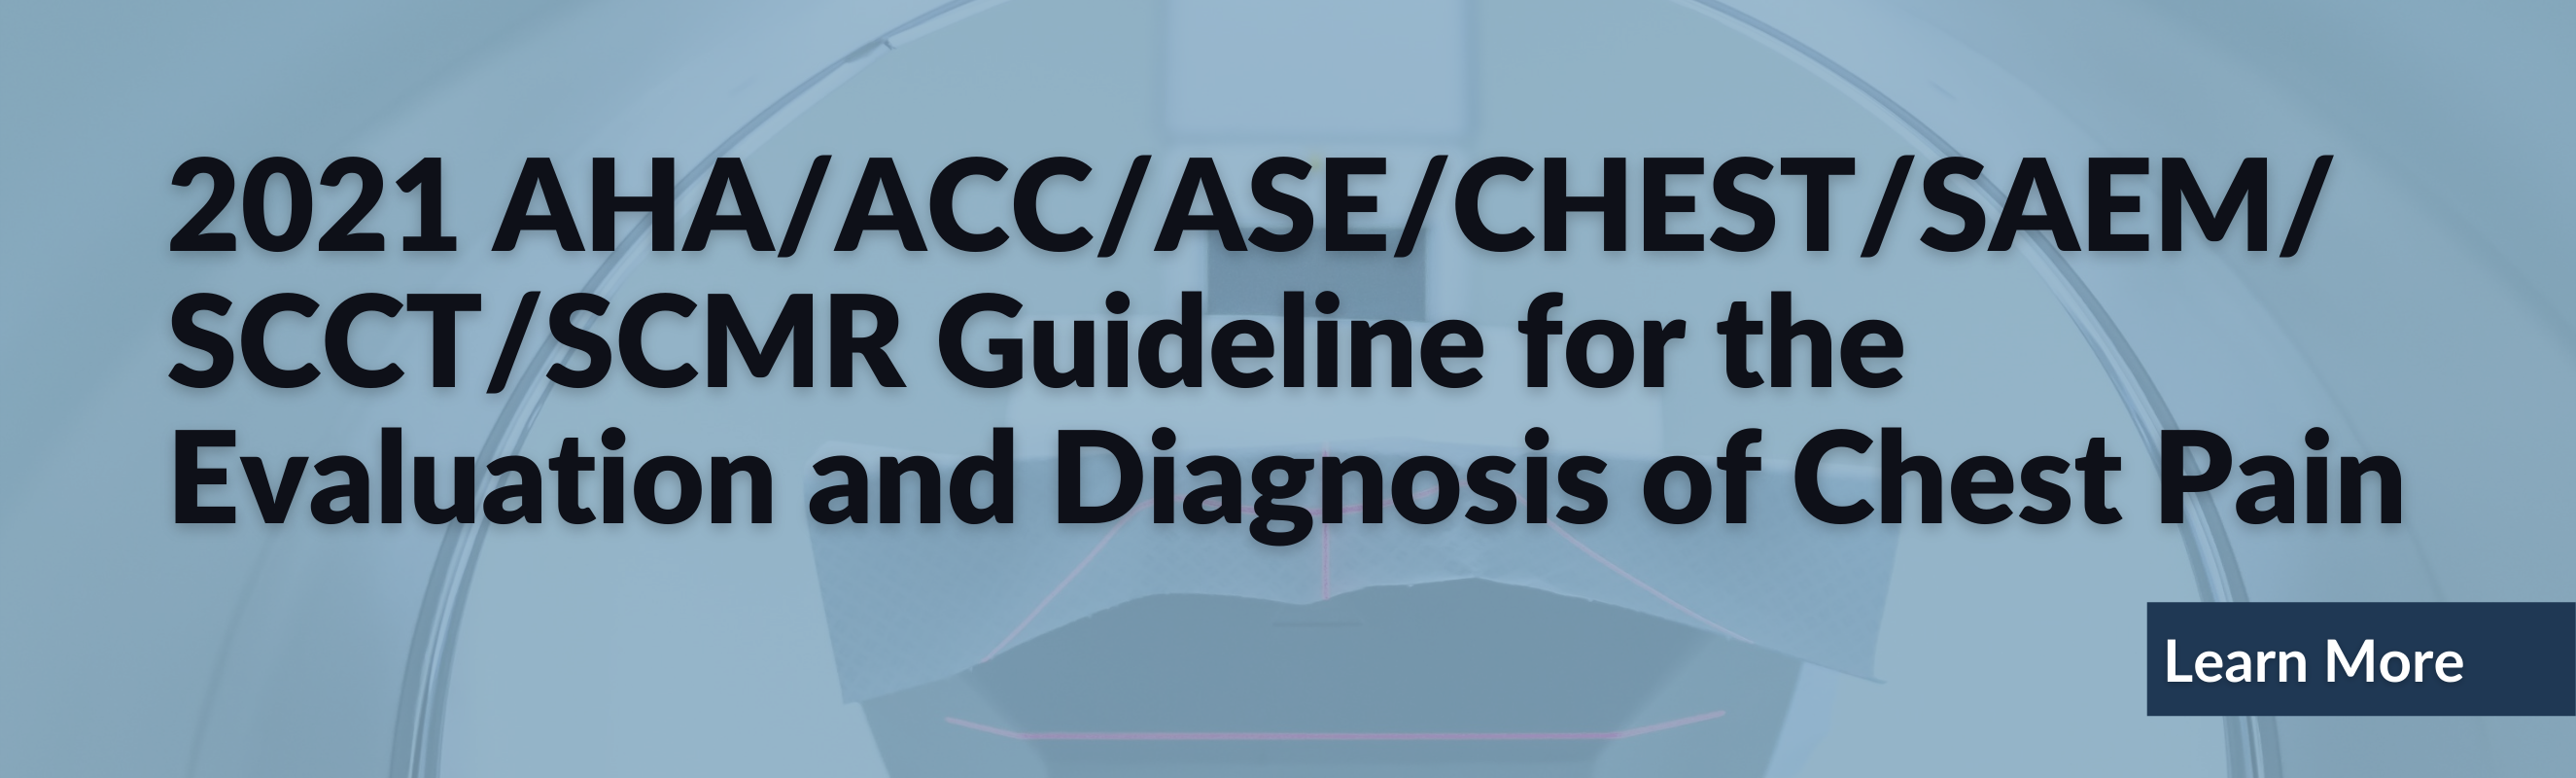 Guideline for the Evaluation and Diagnosis of Chest Pain